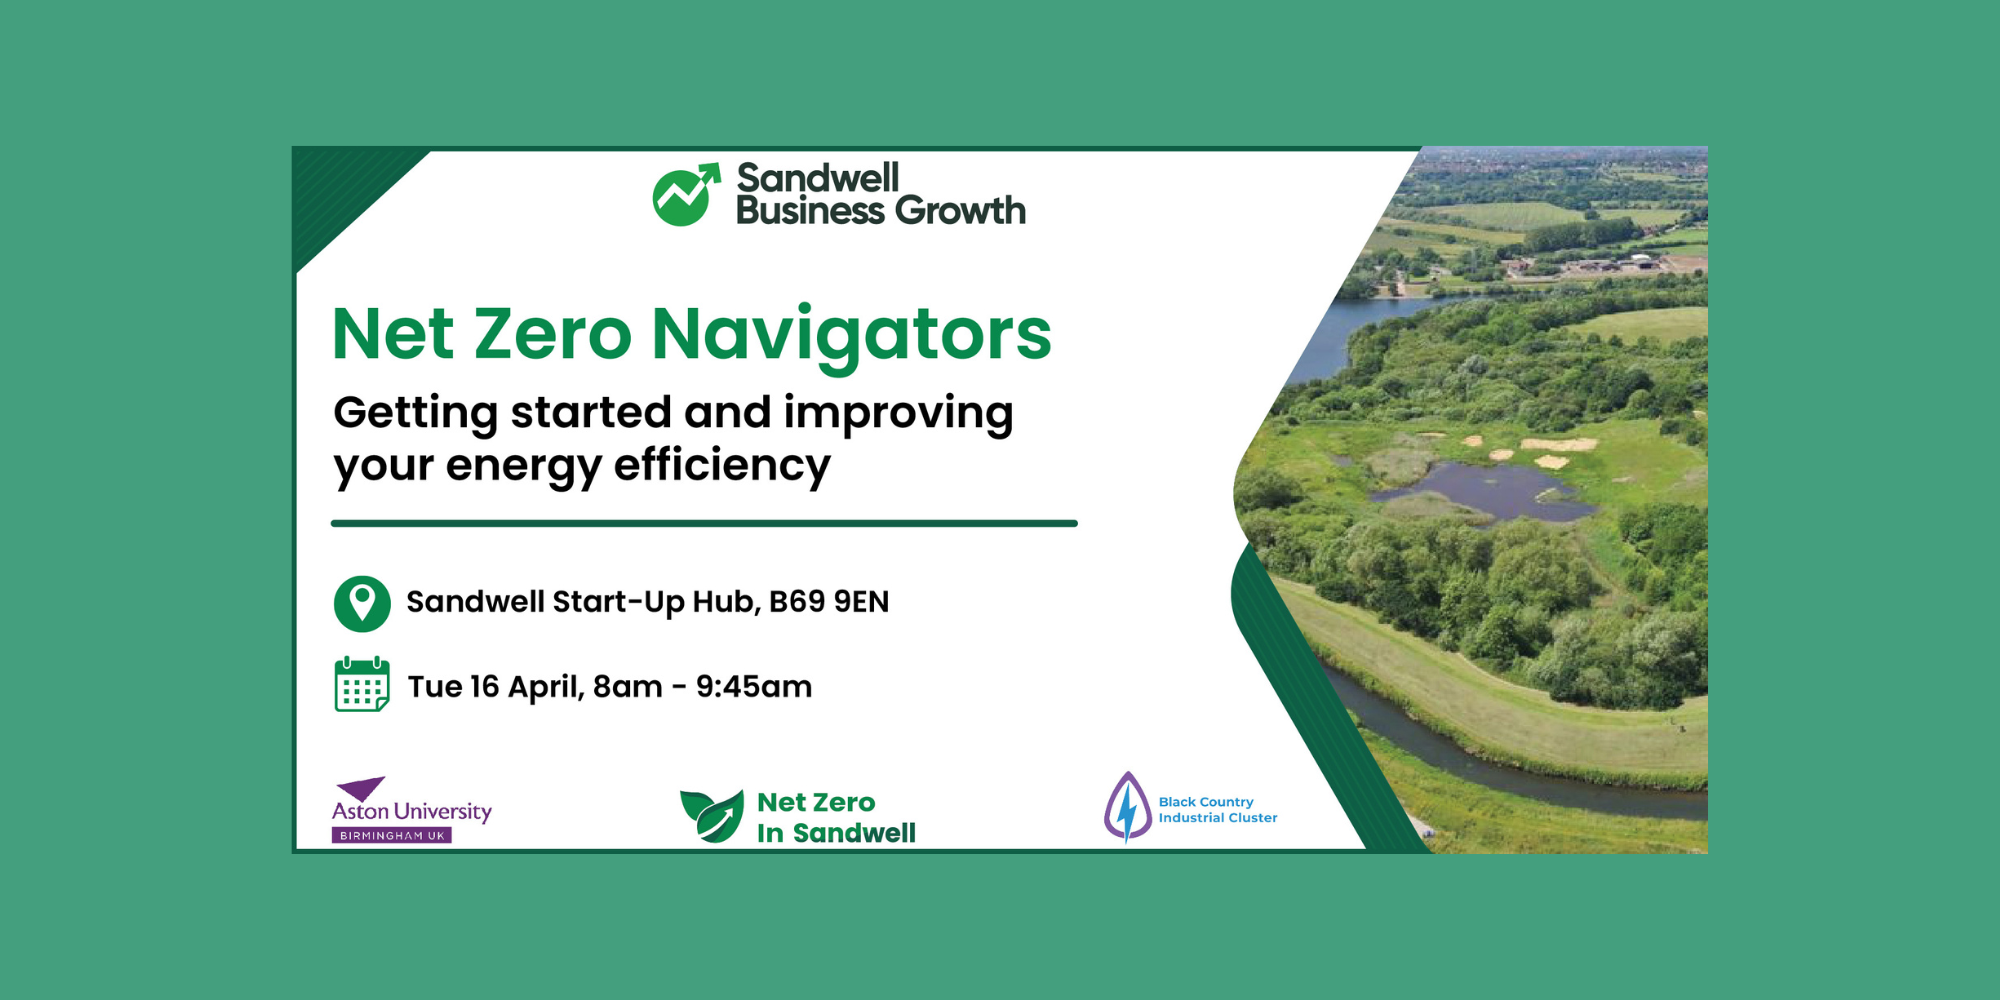 Net Zero Navigators: Getting started and improving your energy efficiency